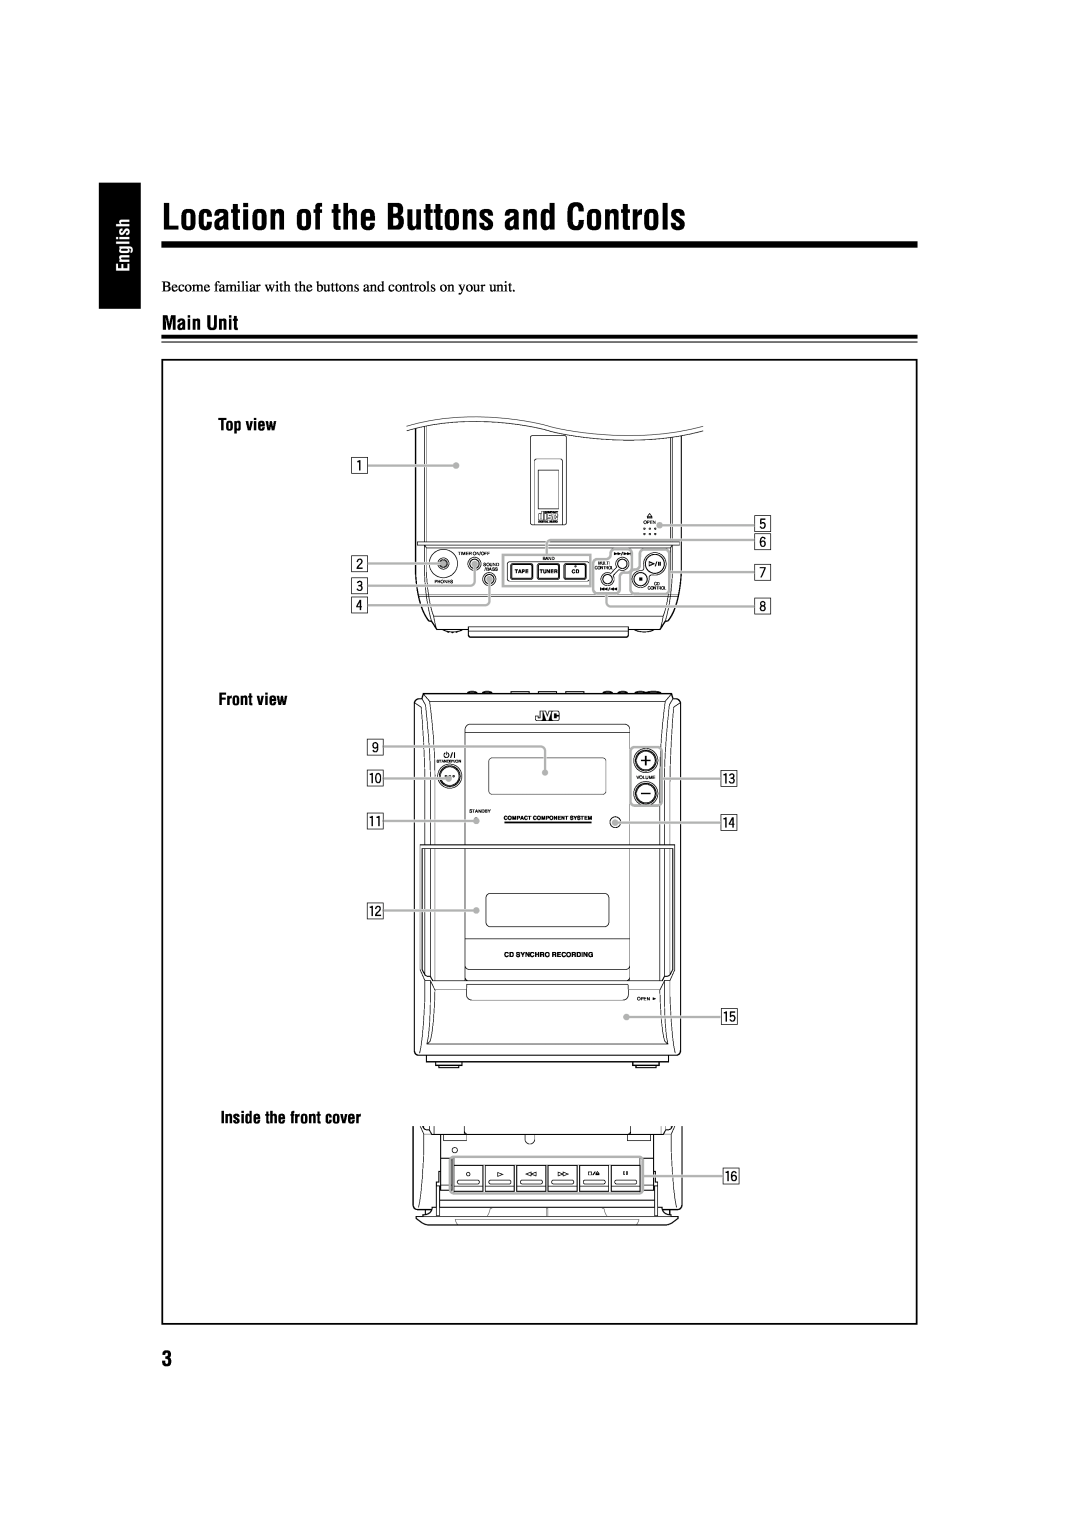 JVC FS-H10 manual Location of the Buttons and Controls, Main Unit, English, Tape Tuner, Compact Component System 